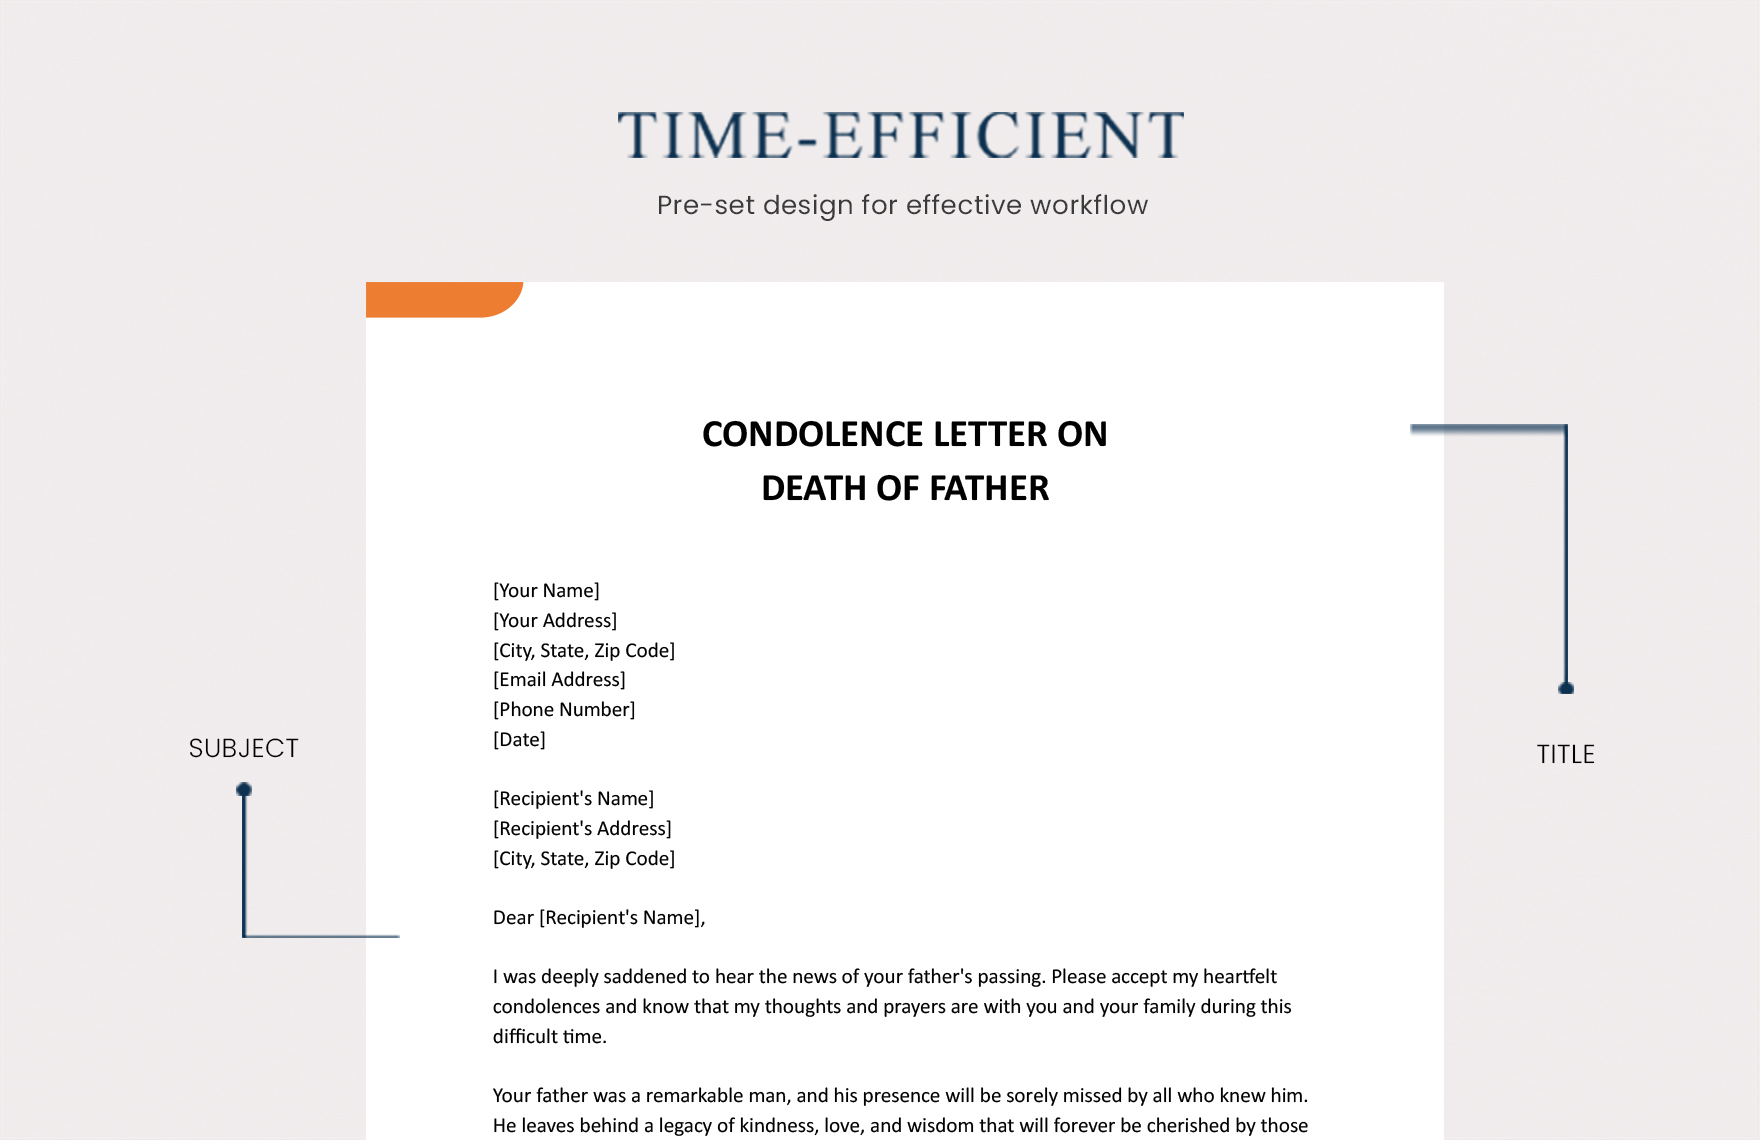 Condolence Letter On Death Of Father